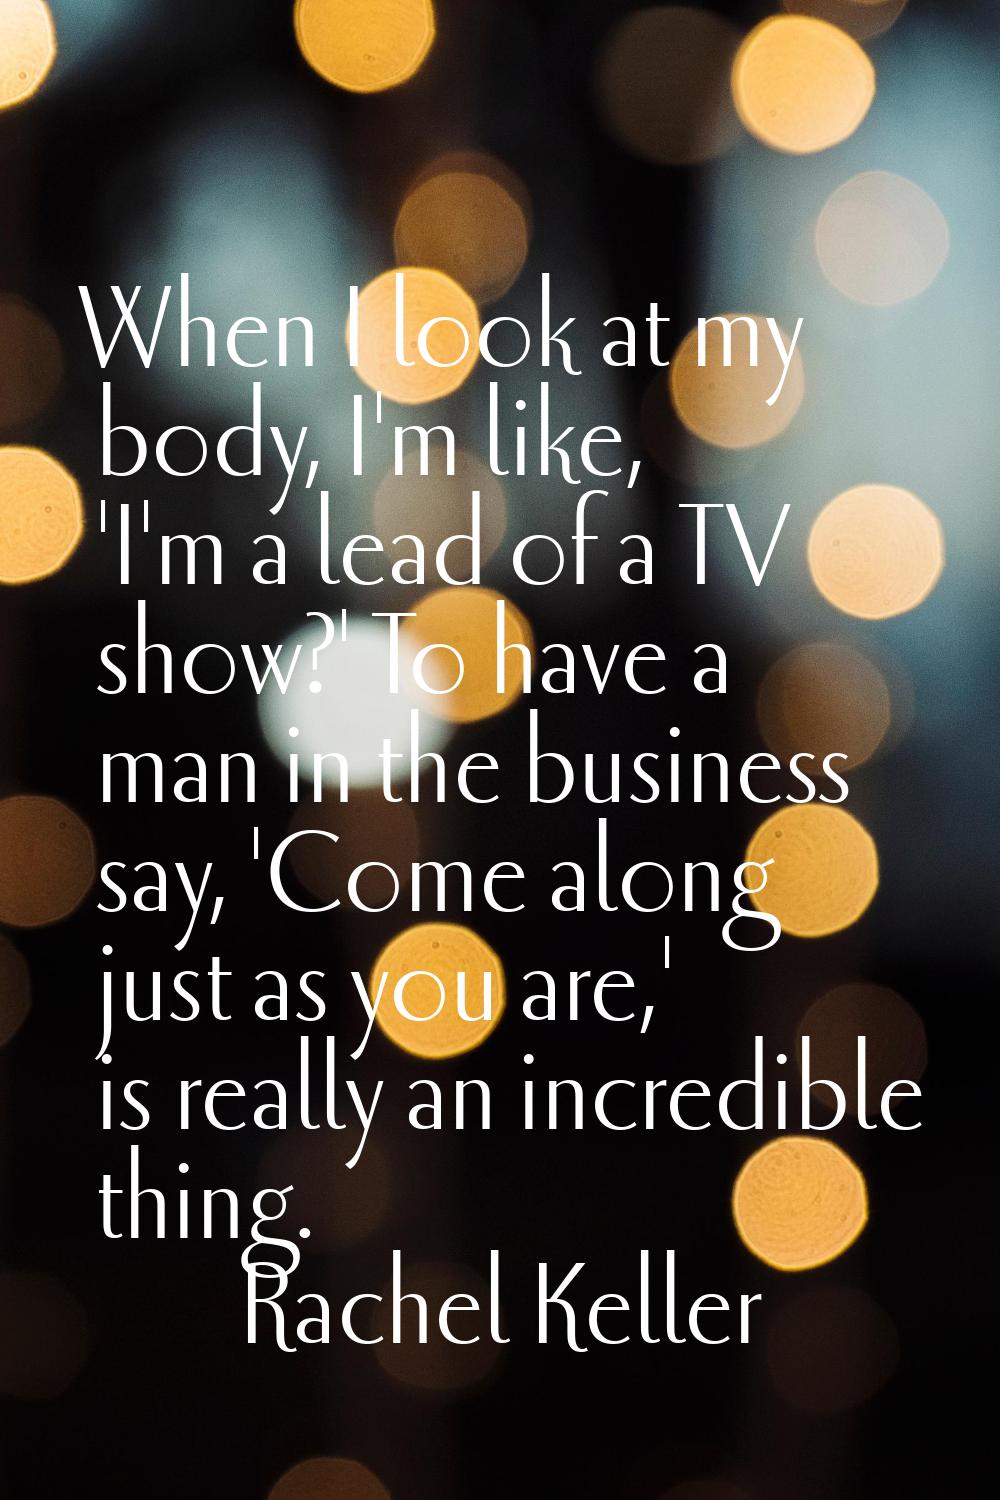 When I look at my body, I'm like, 'I'm a lead of a TV show?' To have a man in the business say, 'Co